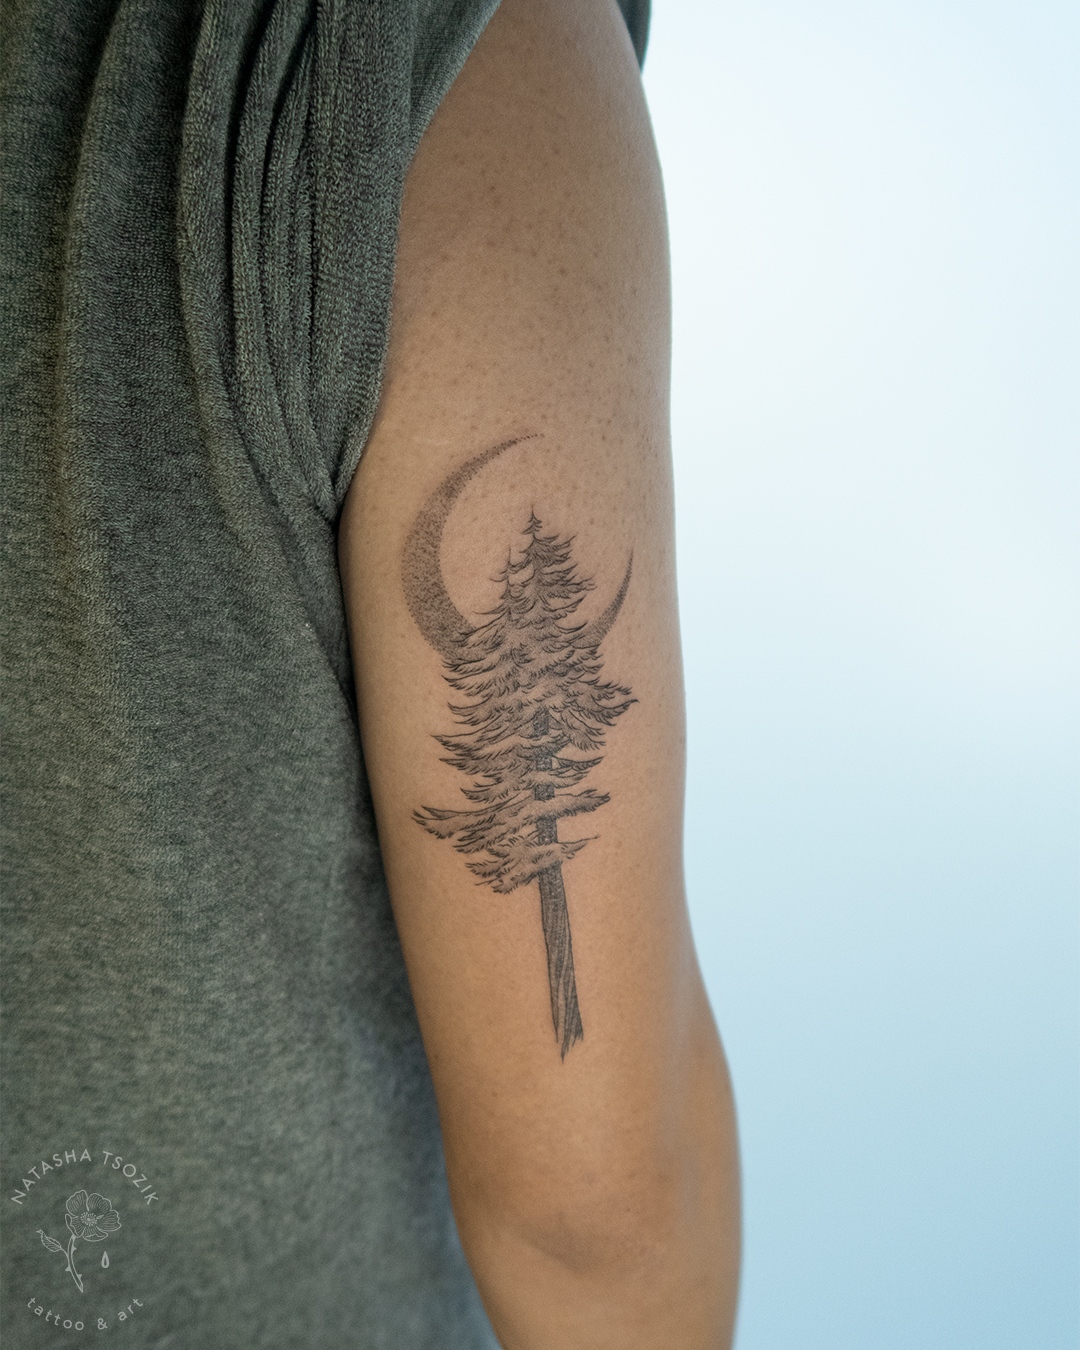 Witness the artistry of Brücius as he captures the essence of trees through  exquisite tattoos of Redwoods and Sequoias, inspired by the… | Instagram